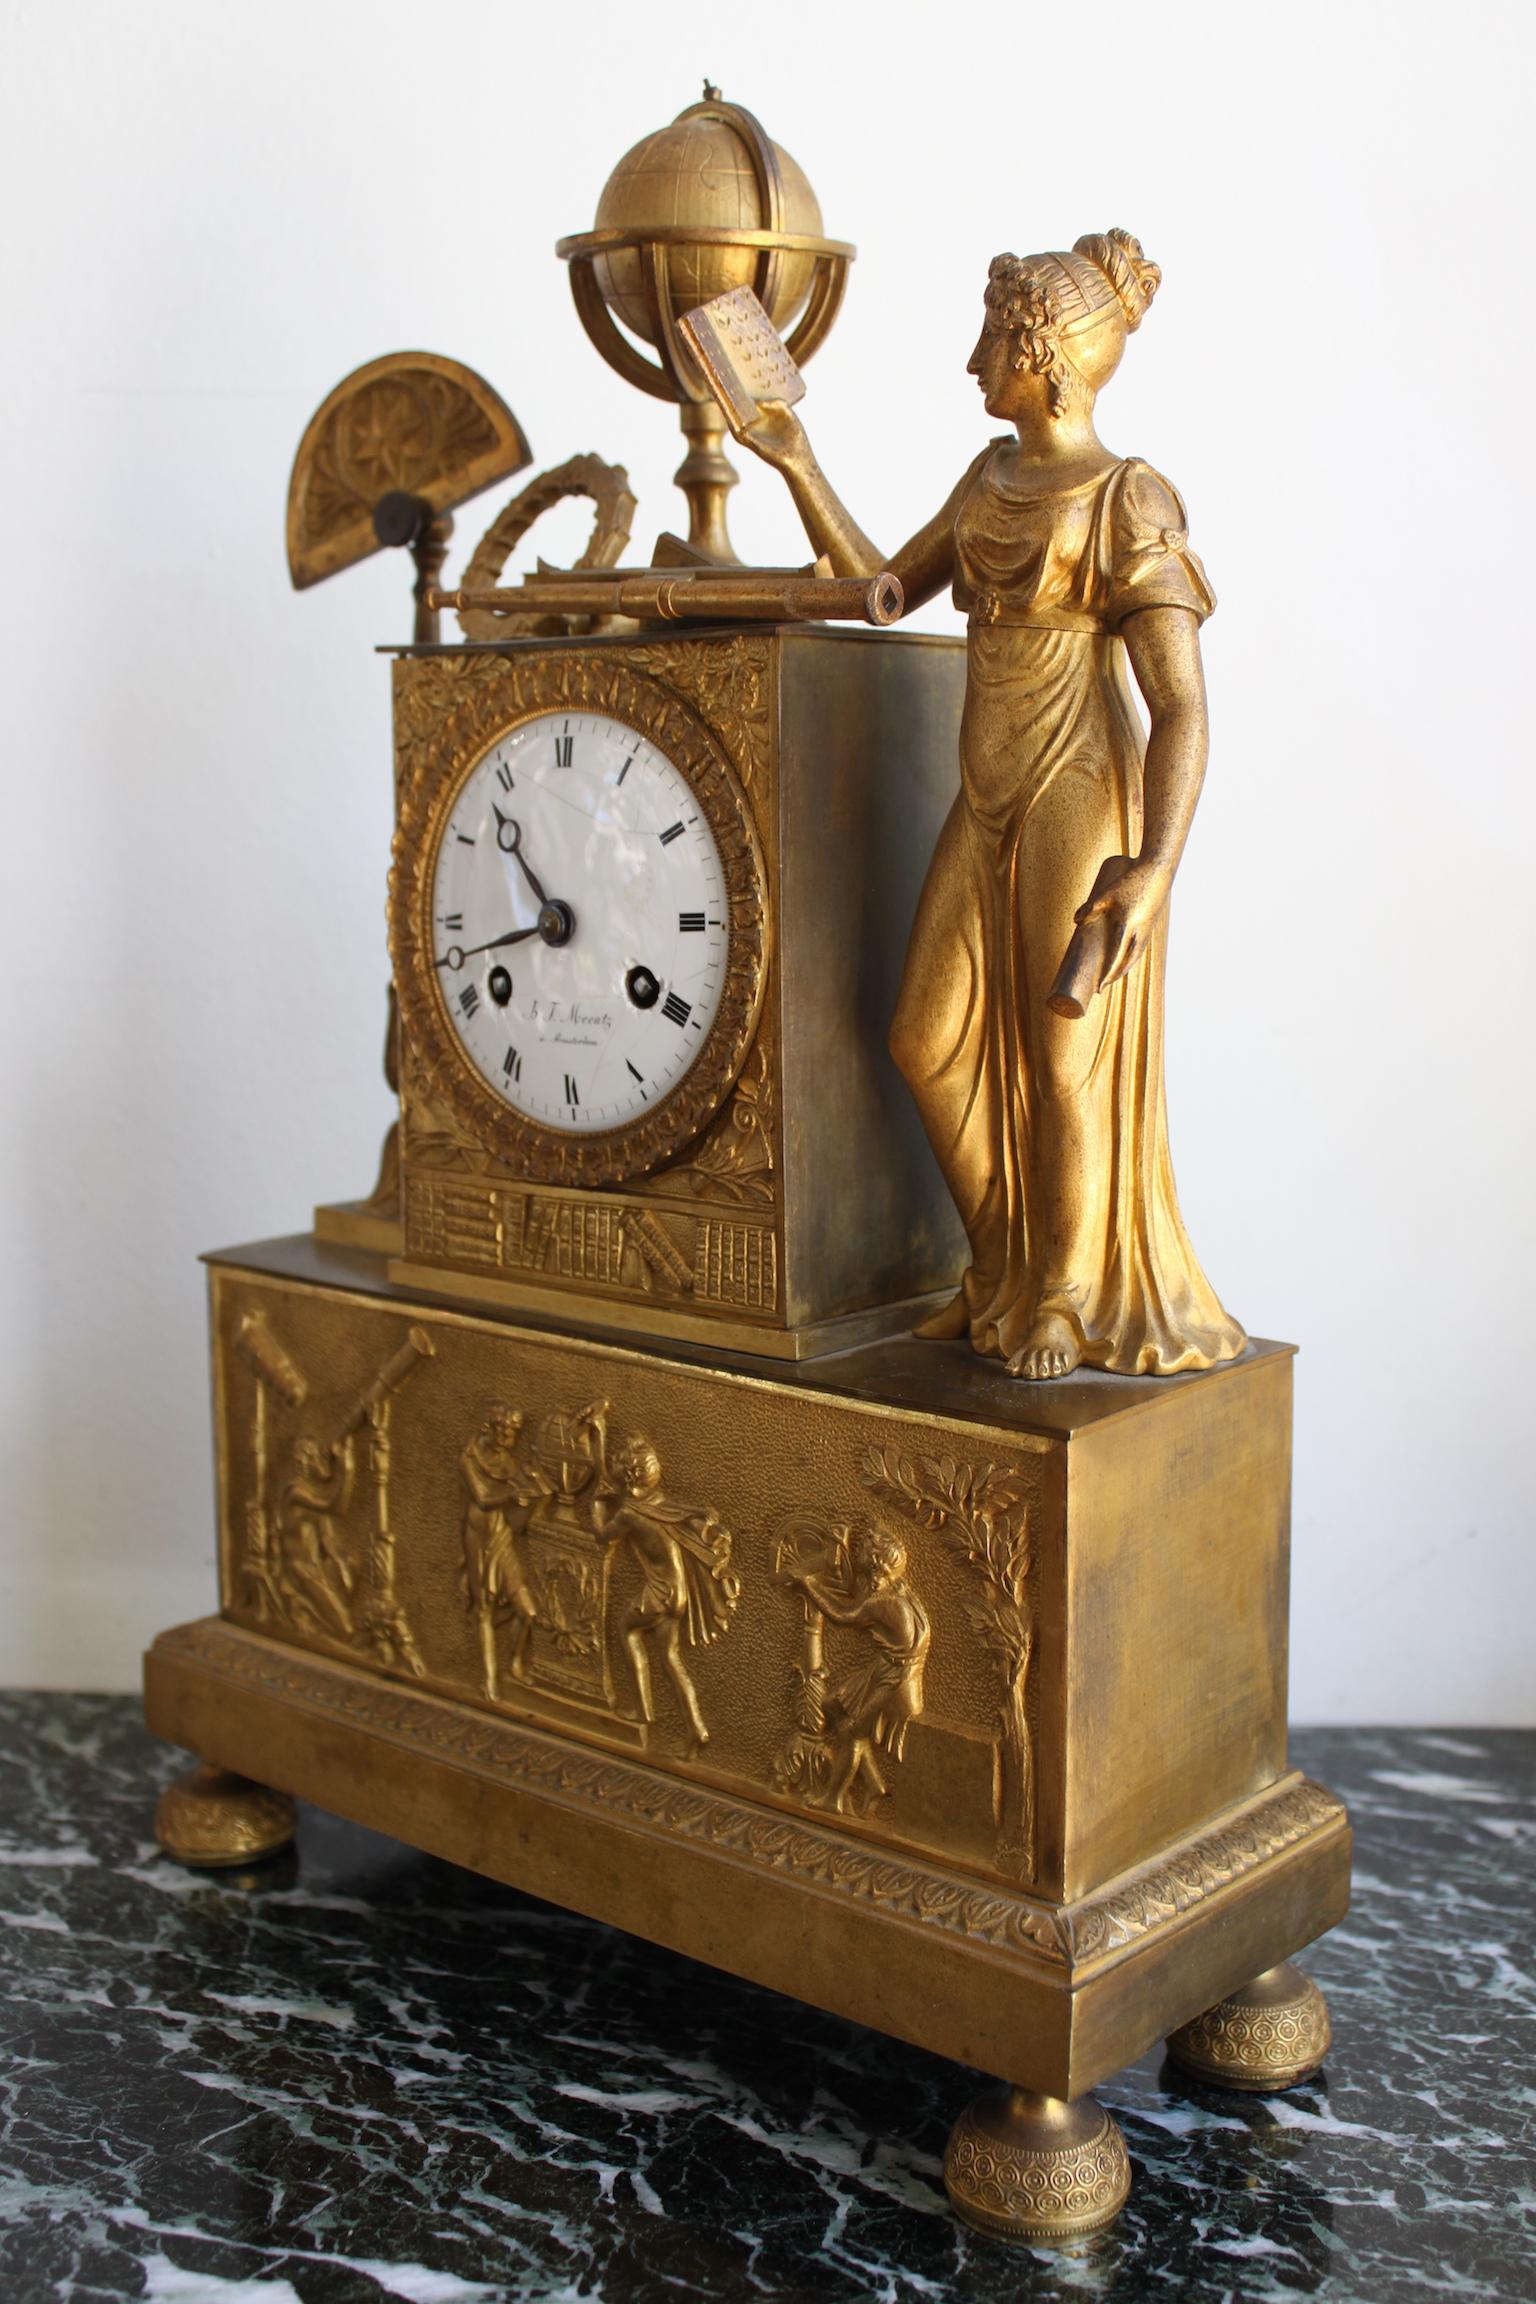 Early 19th century gilt bronze clock representing the Allegory of Sciences. Movement JJ Meentz - Amsterdam.
Little cracks on the dial.
Dimensions: Height 36cm, width 25cm, depth 9cm.